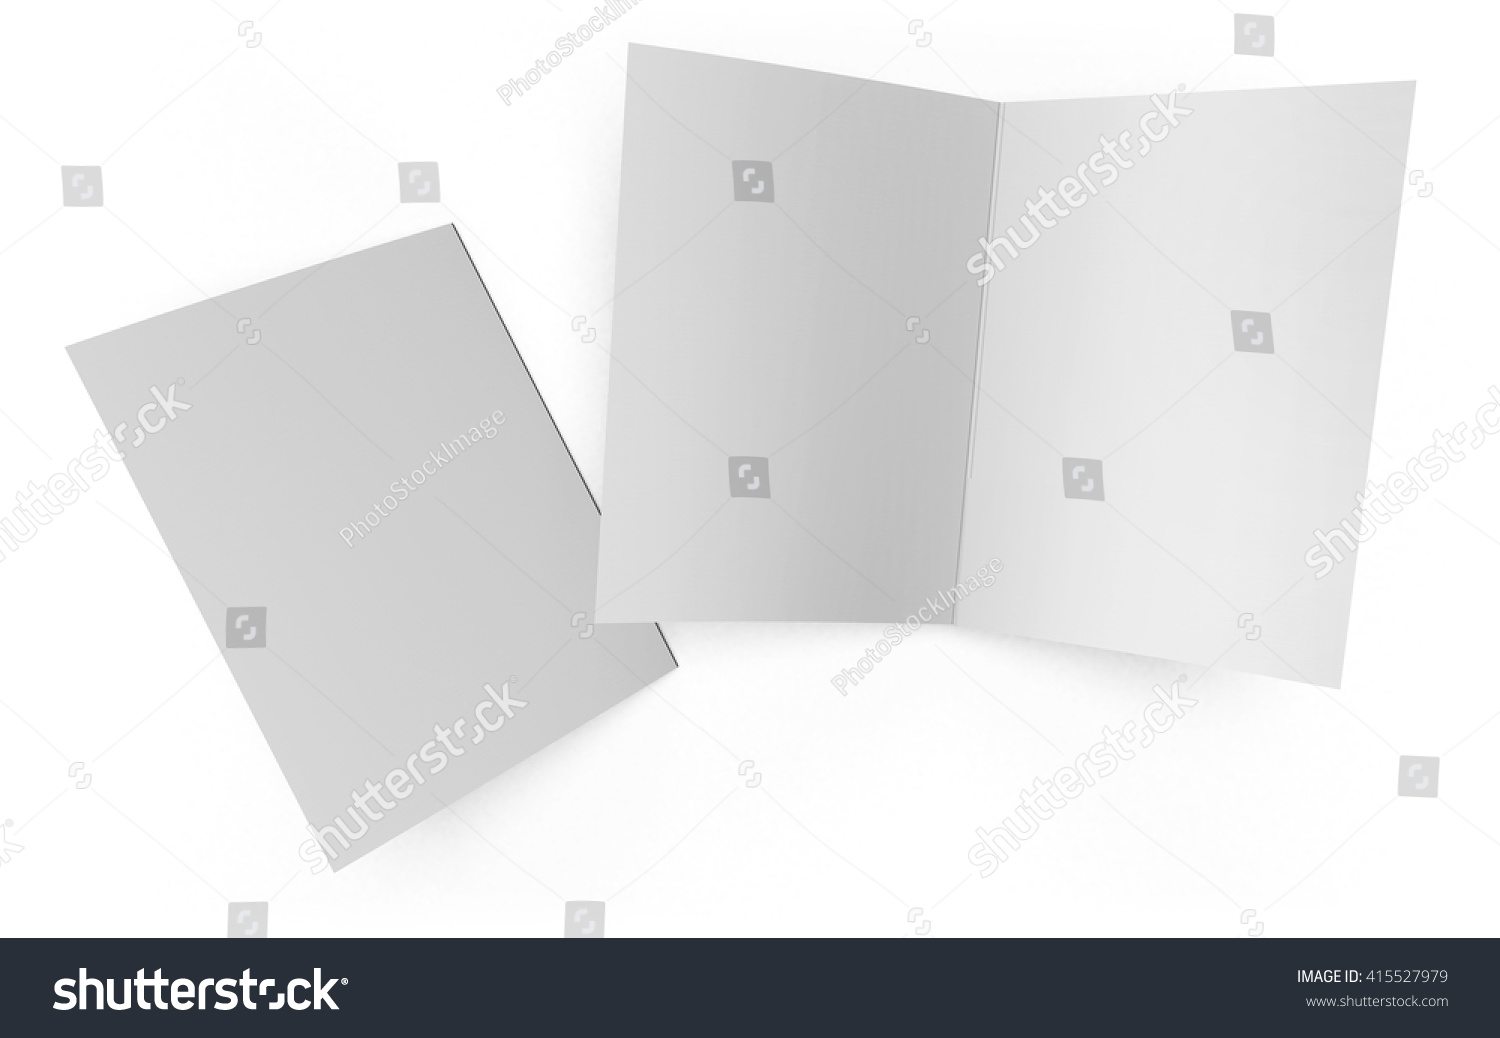 Open and closed folder isolated on white background. This mockup template includes a clipping path for easy selection of the booklet cover. #415527979